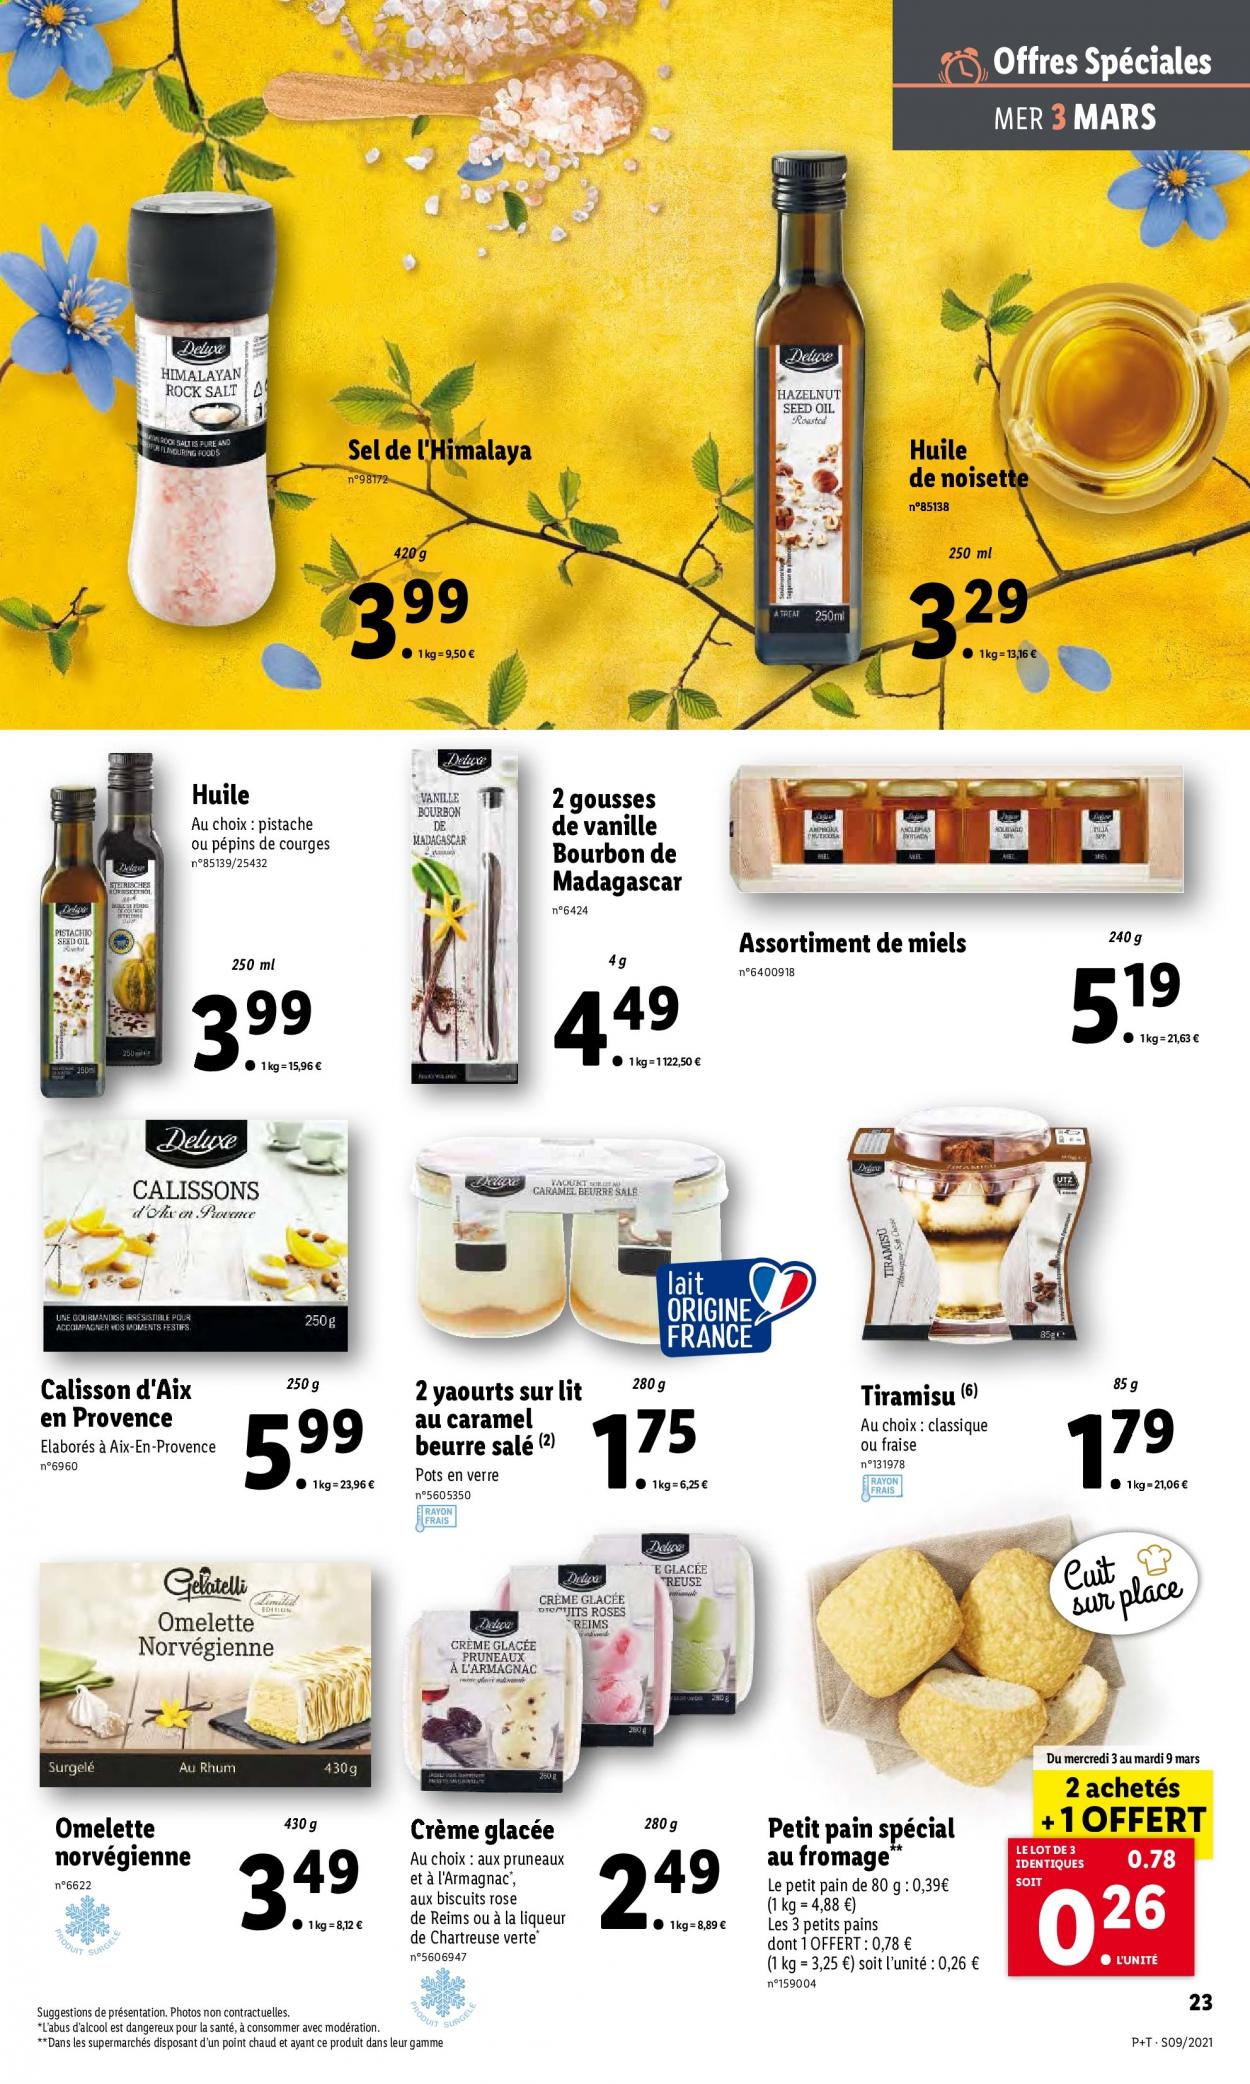 Catalogue Lidl - 03.03.2021 - 09.03.2021. Page 23.